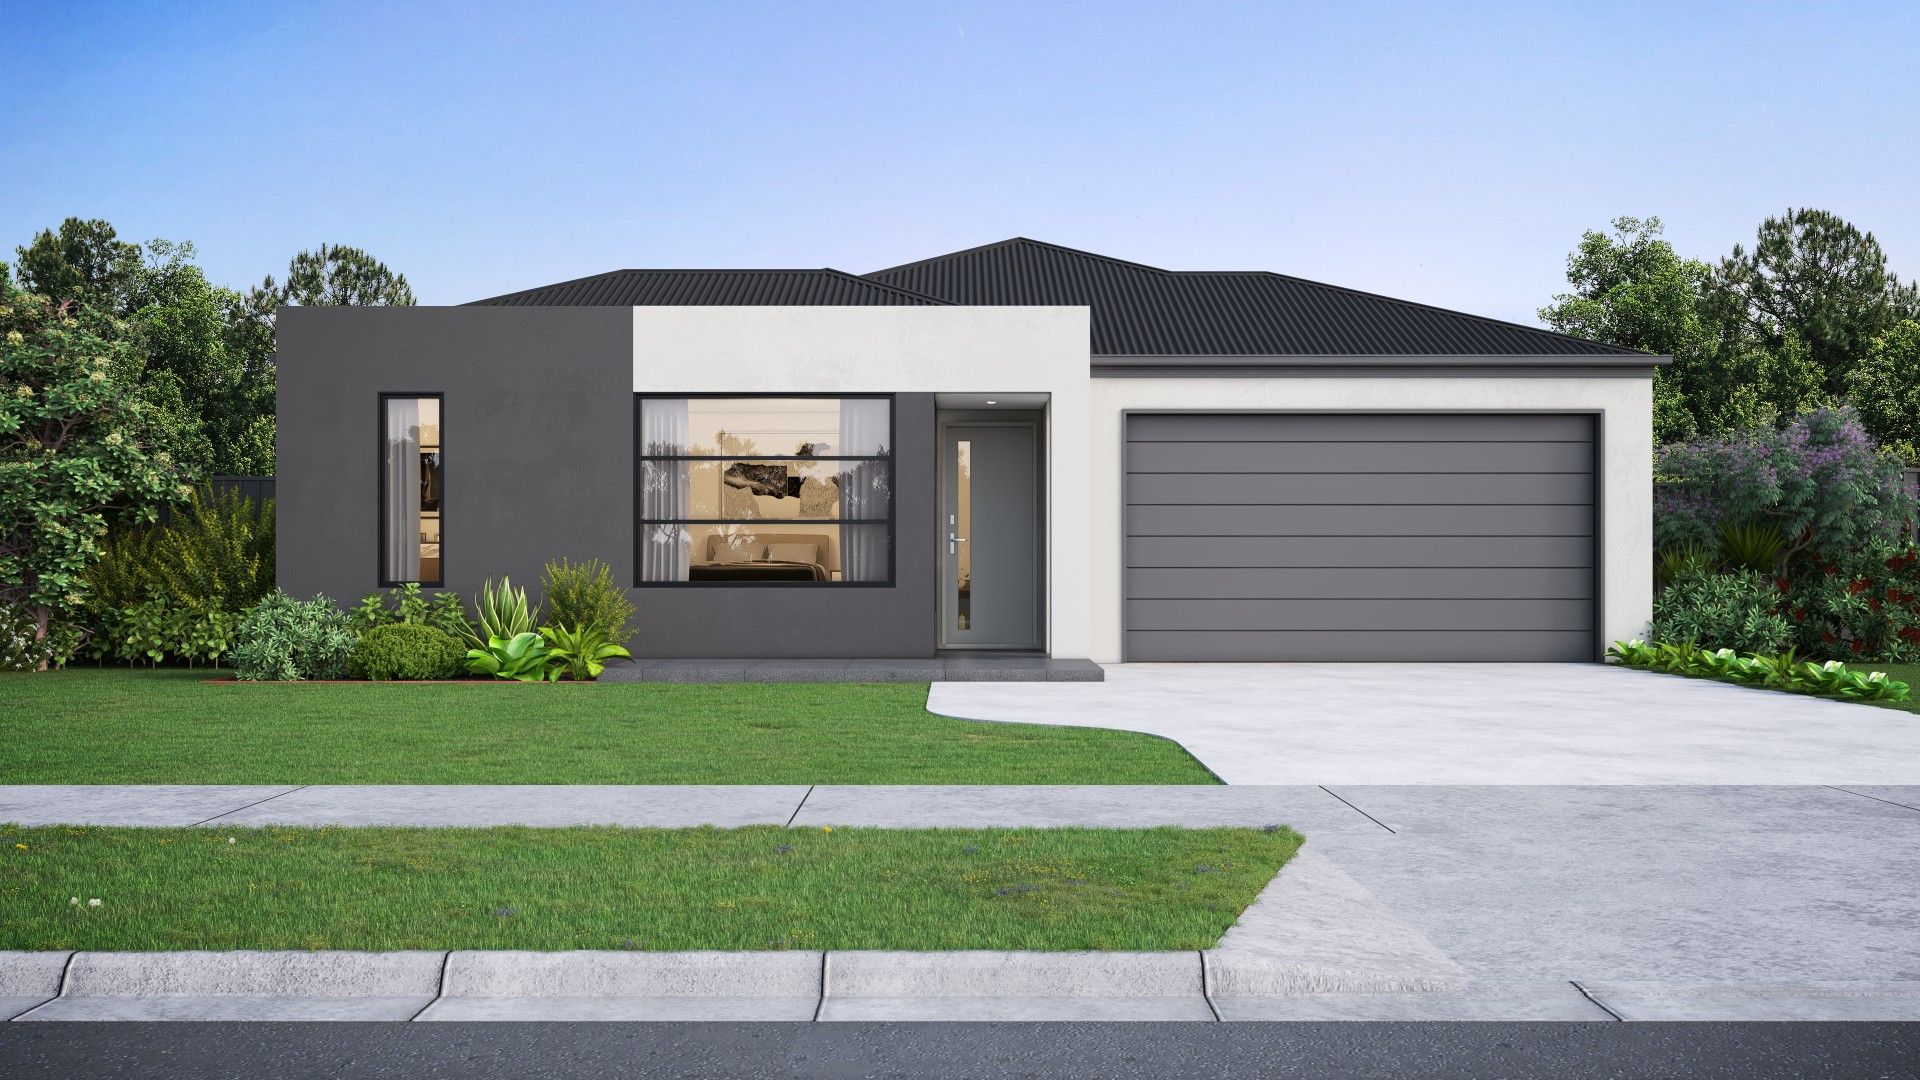 4 bedrooms New House & Land in Lot 1223 Bray St DEANSIDE VIC, 3336